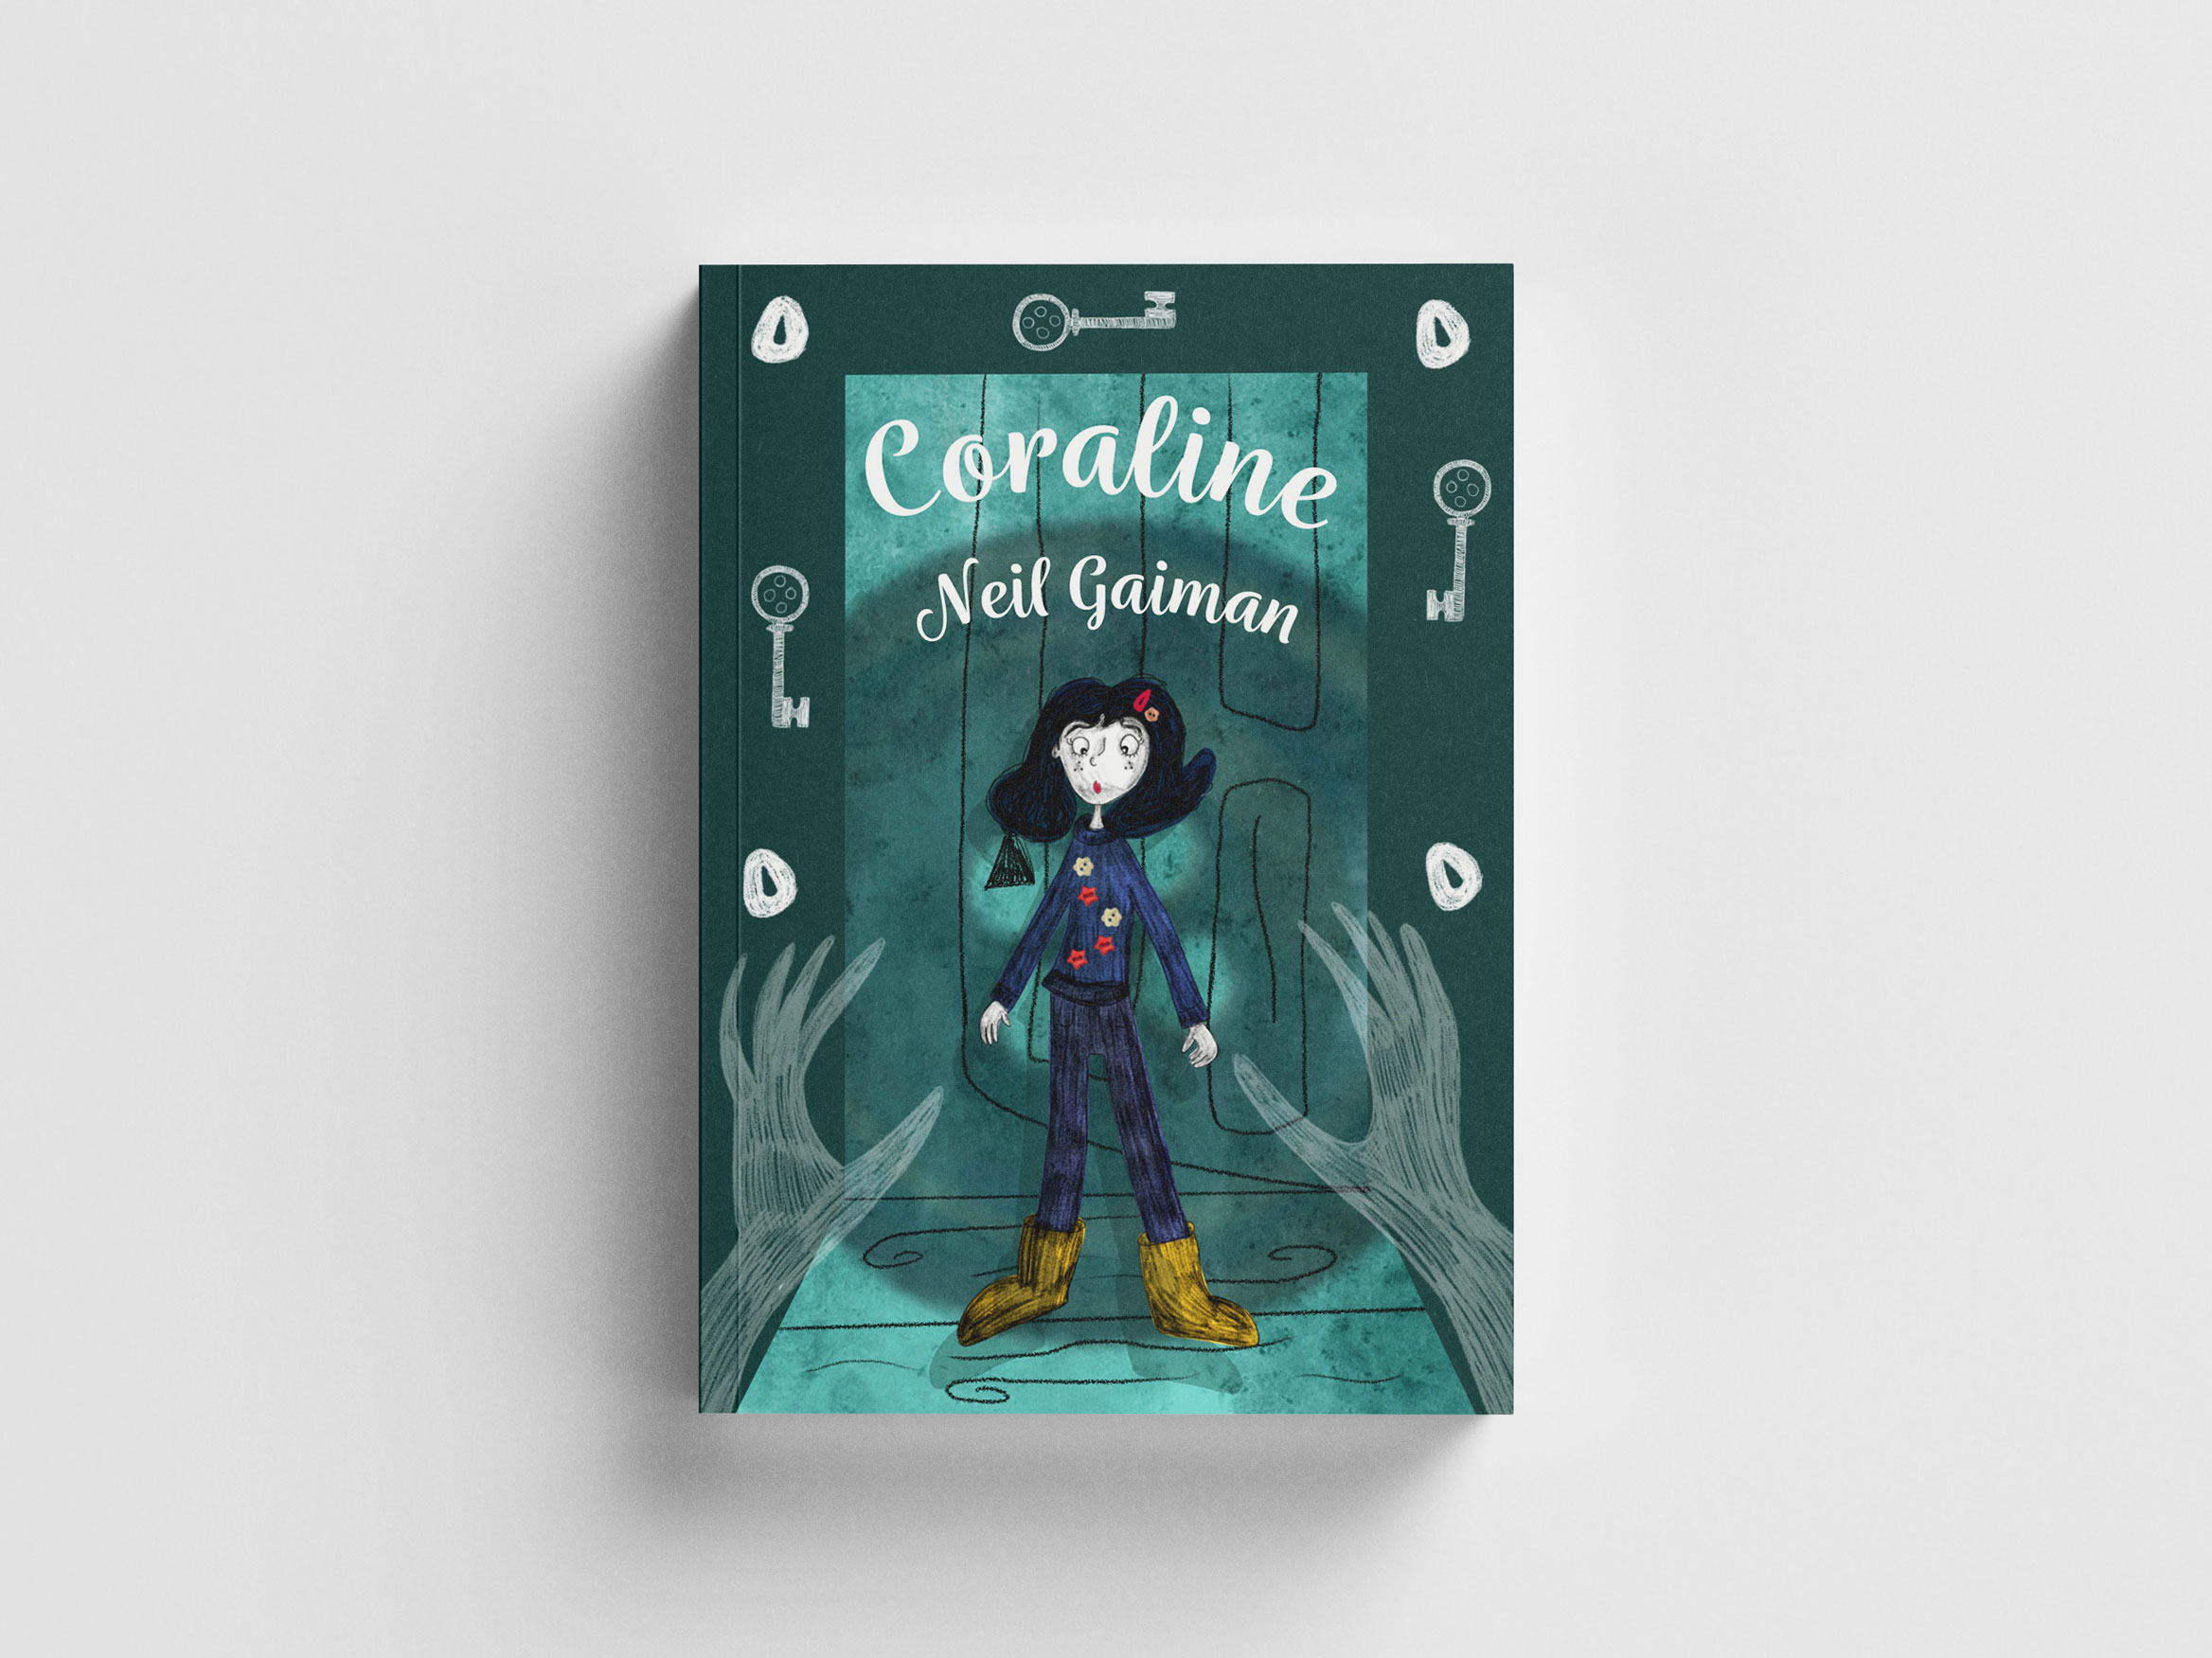 Redesigned book cover for Neil Gaiman's 'Coraline'. Showing Coraline opening the door to the other world a dark green background with ghost hands in the foreground.